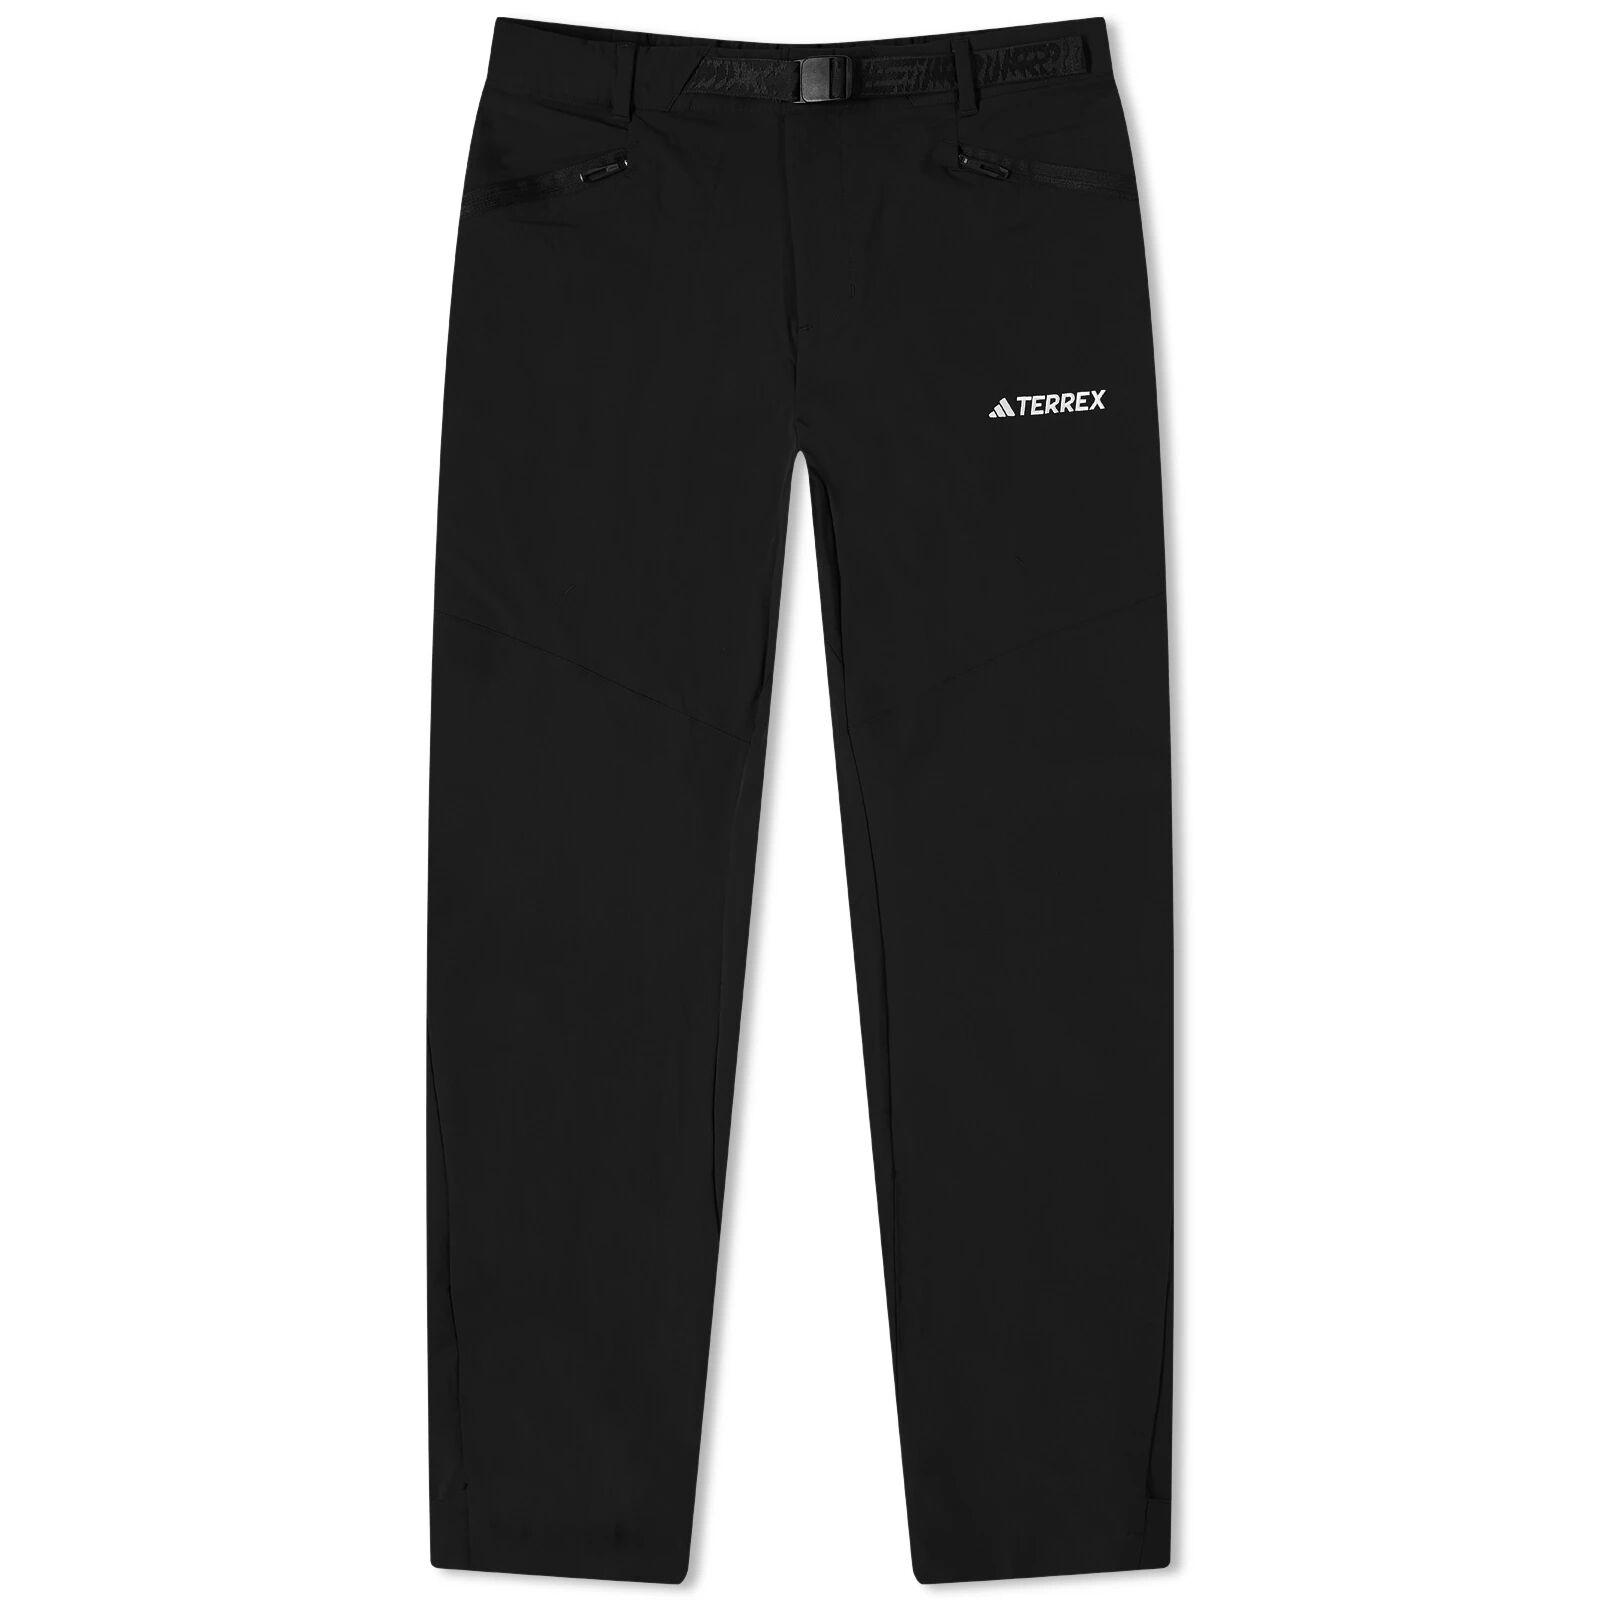 Adidas Men's Xperior Pants in Black, Size X-Large